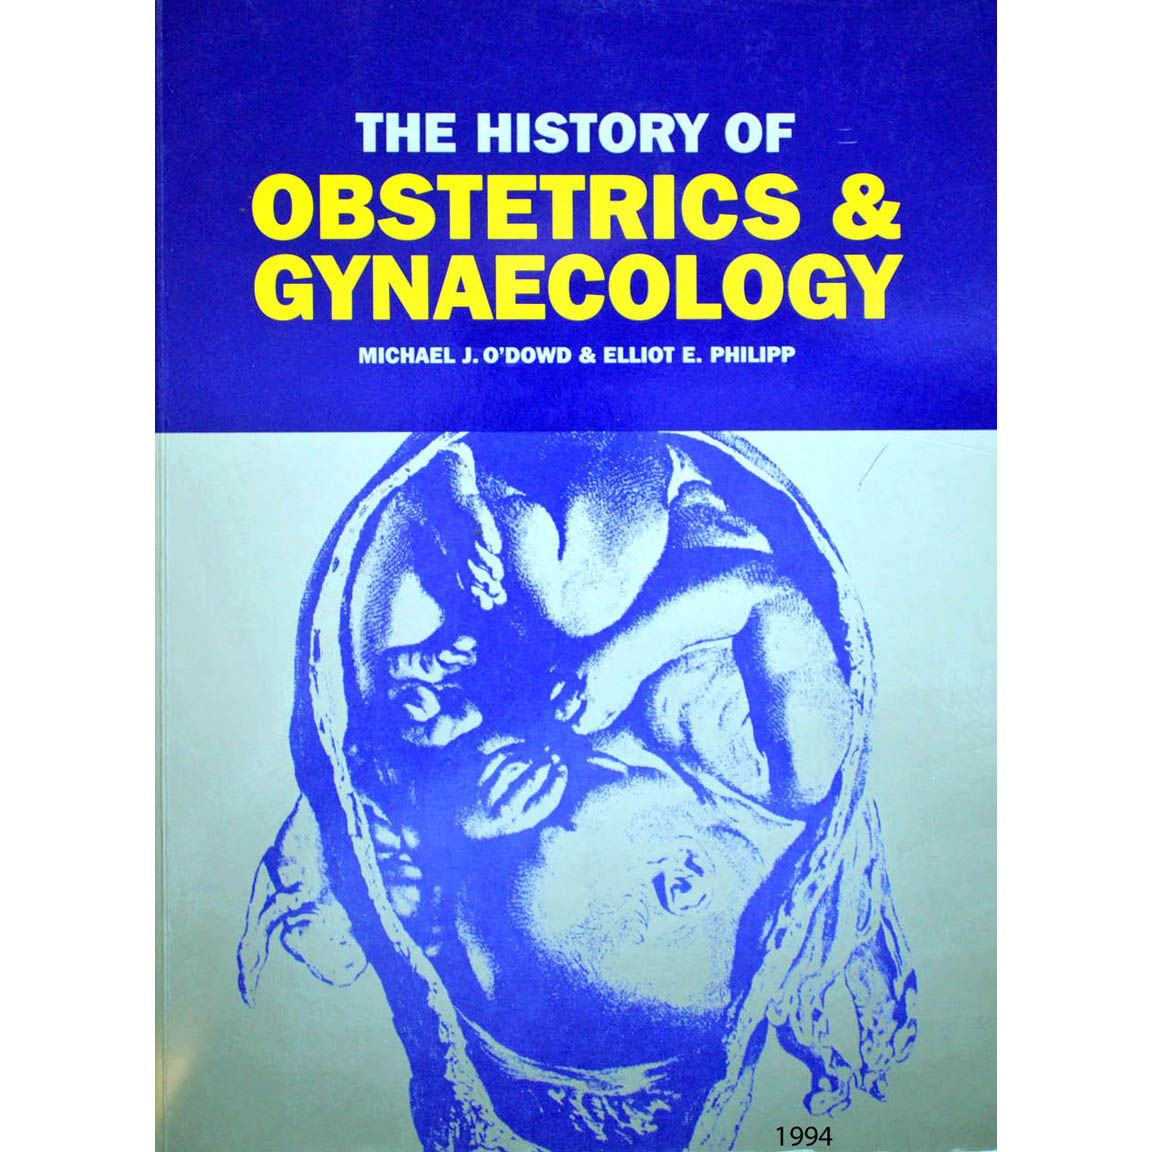 1994-O'DOWD-History OBGYN-title page